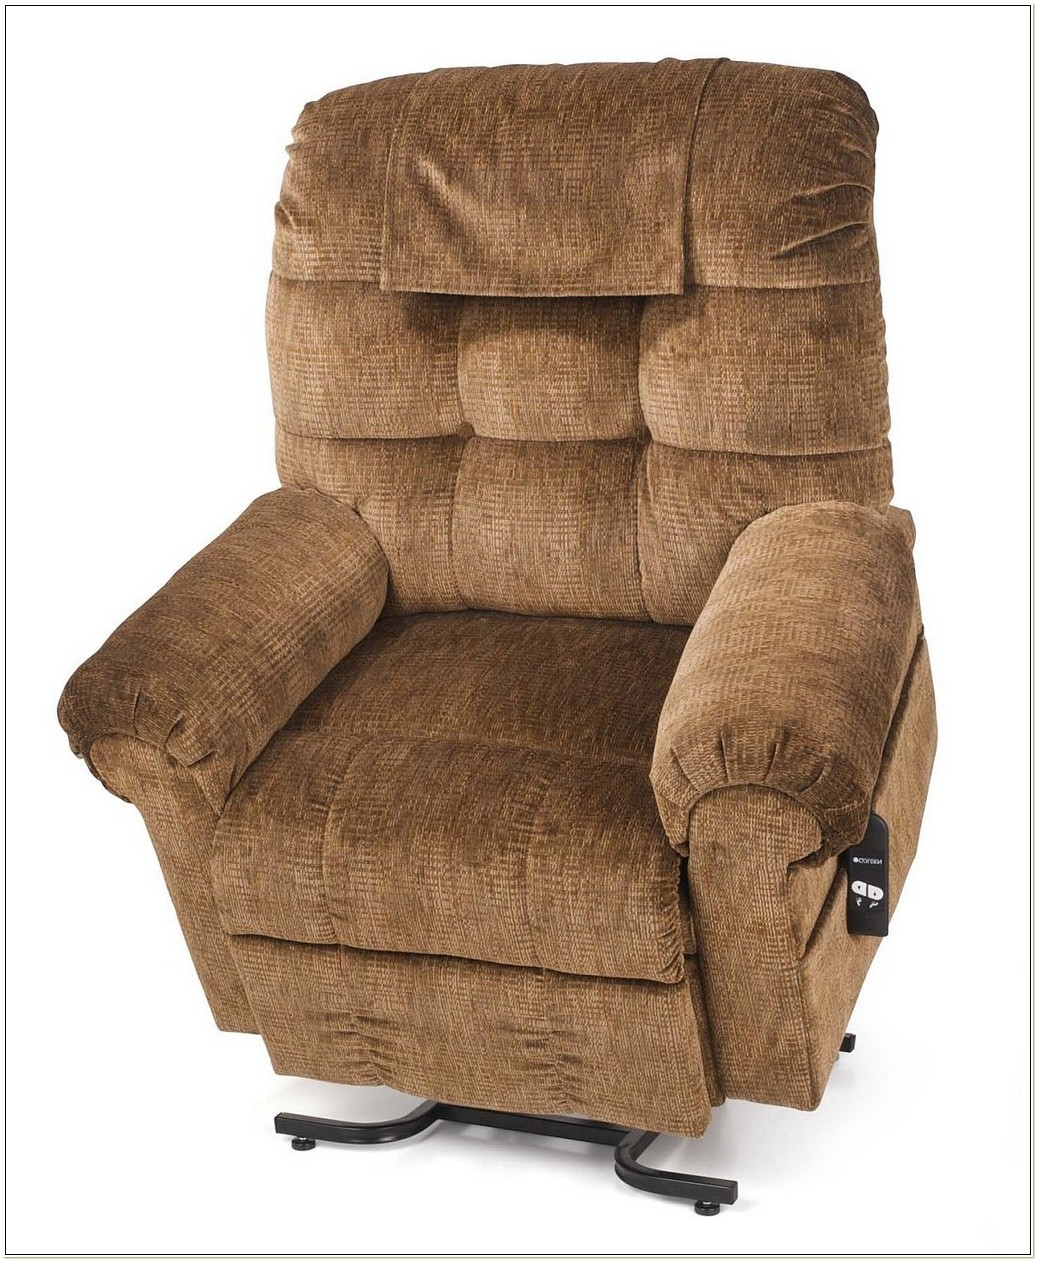 Lazy Boy Lift Chair Recliner - Chairs : Home Decorating Ideas #75lbjvg7lw